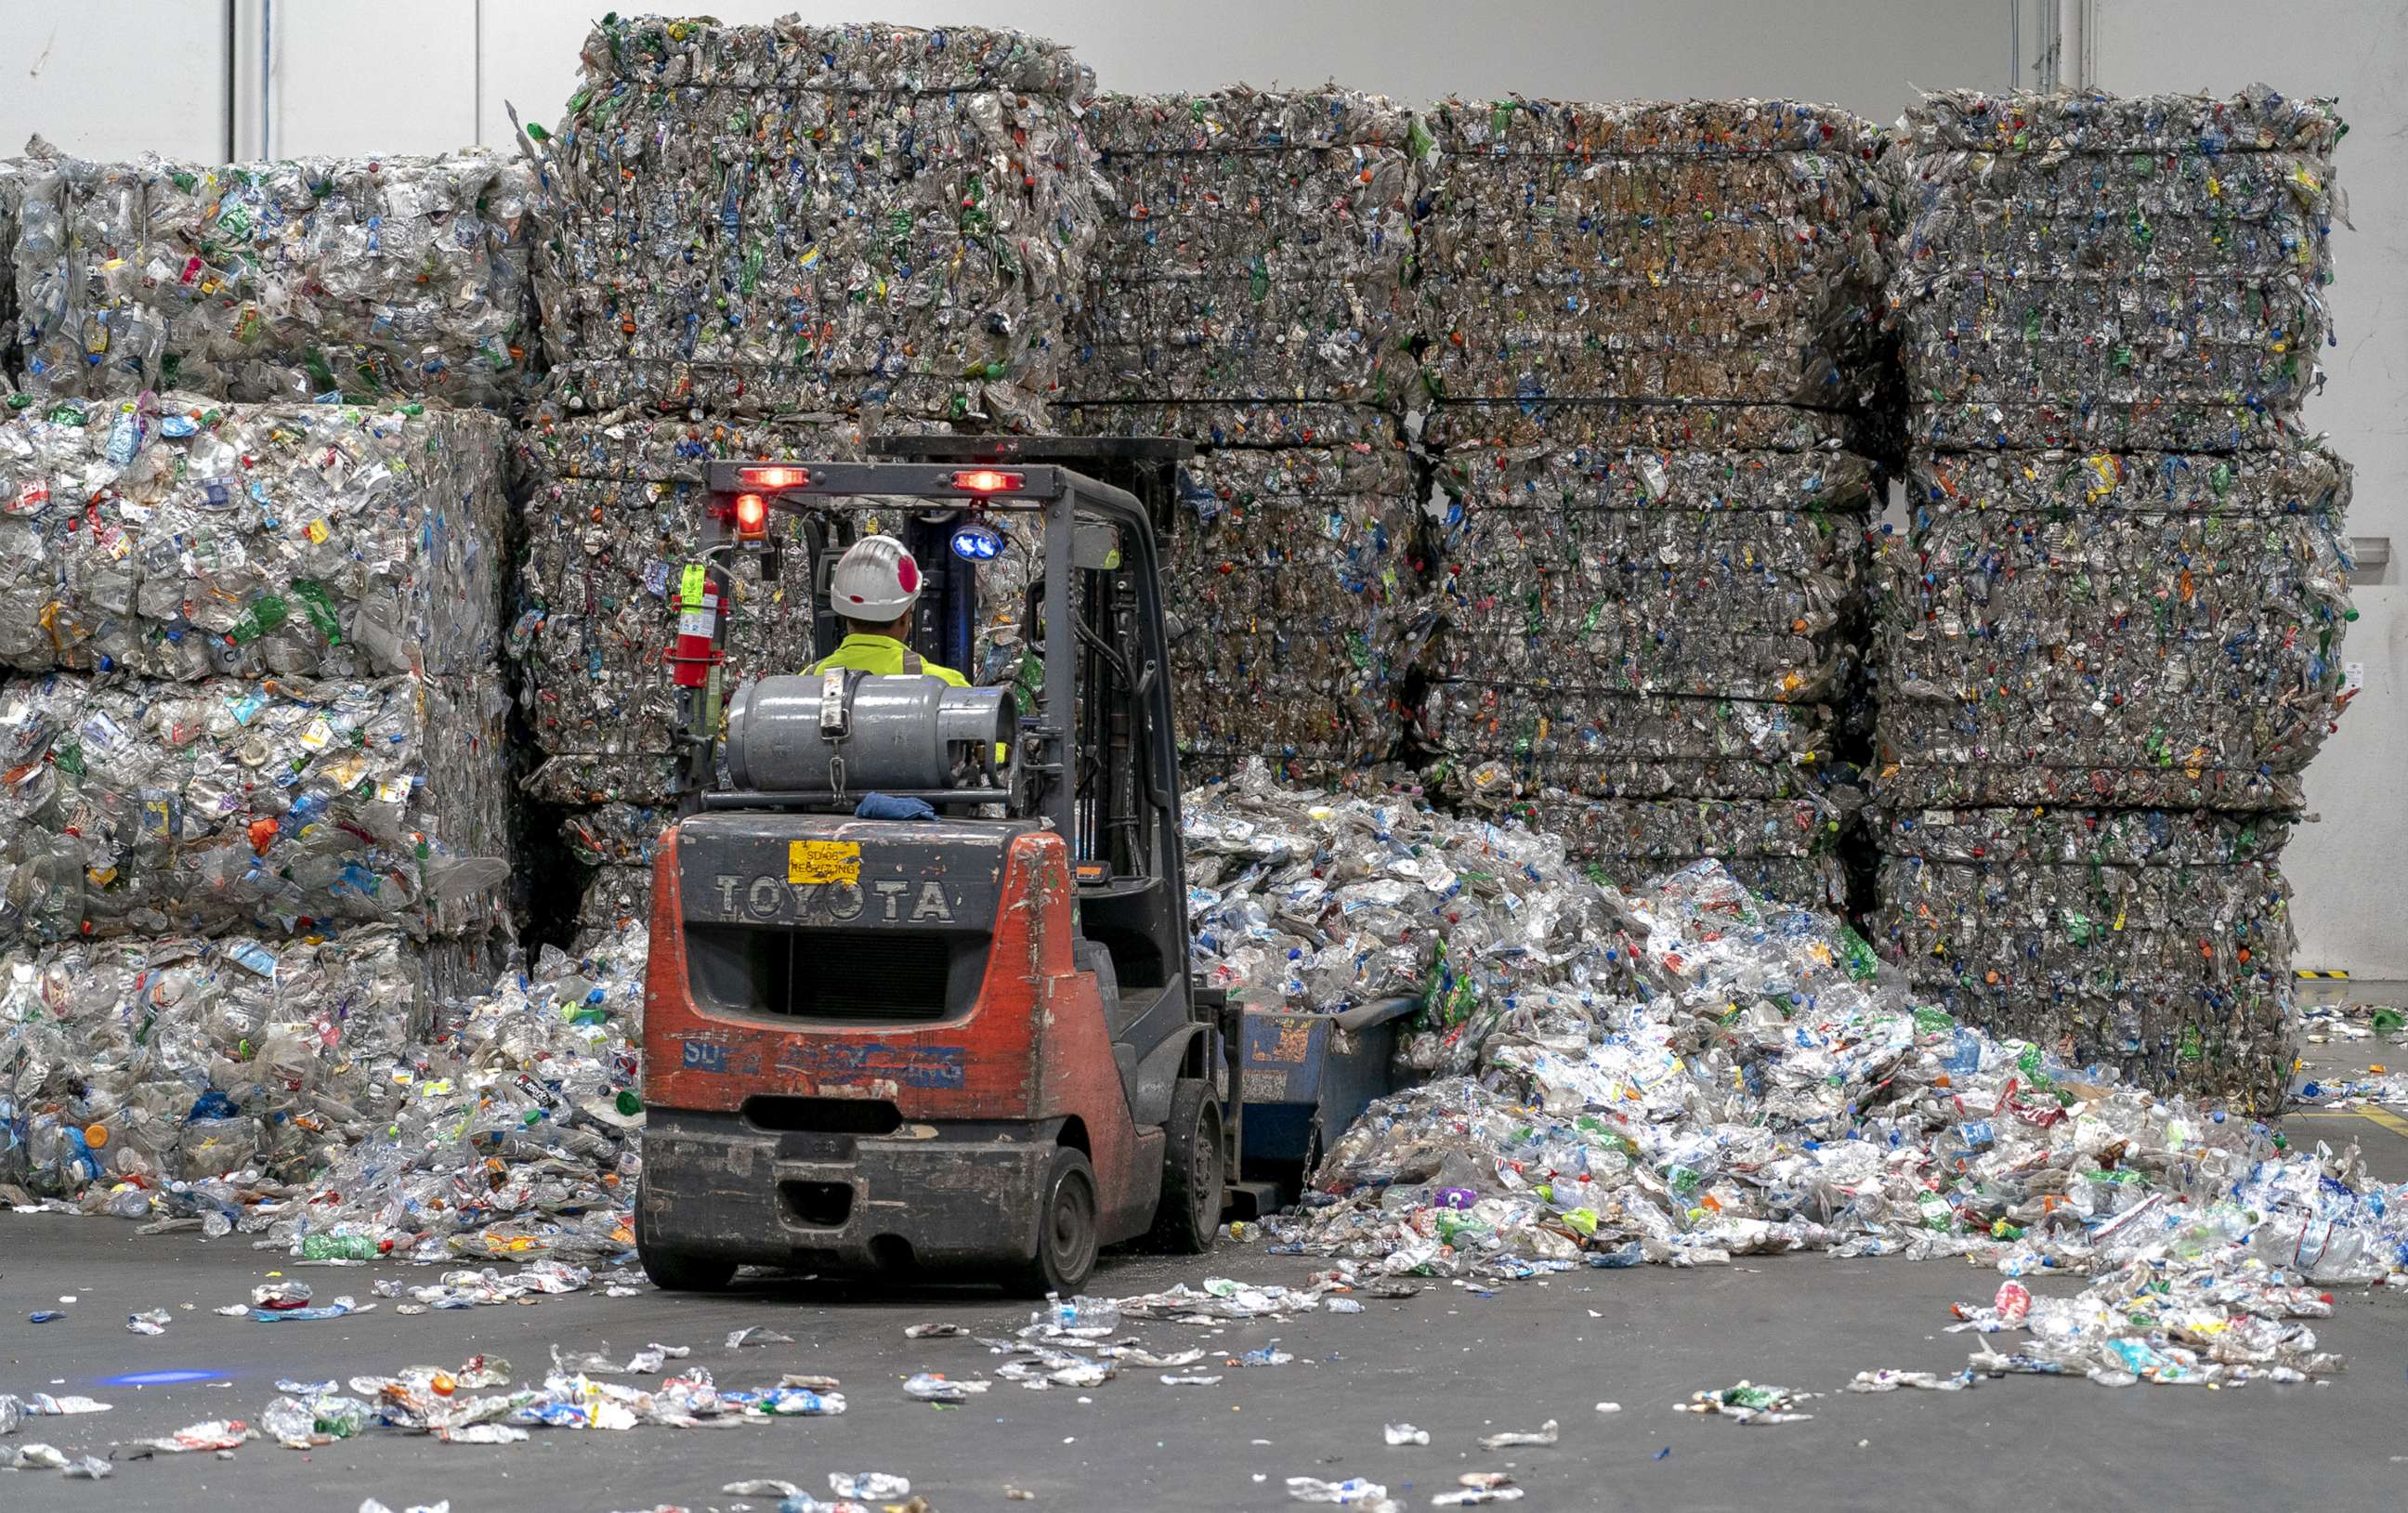 PHOTO: In this June 22, 2022, file photo, an employee operates a forklift to move bales of plastic bottles at the rPlanet Earth plastics recycling plant in Vernon, Calif.